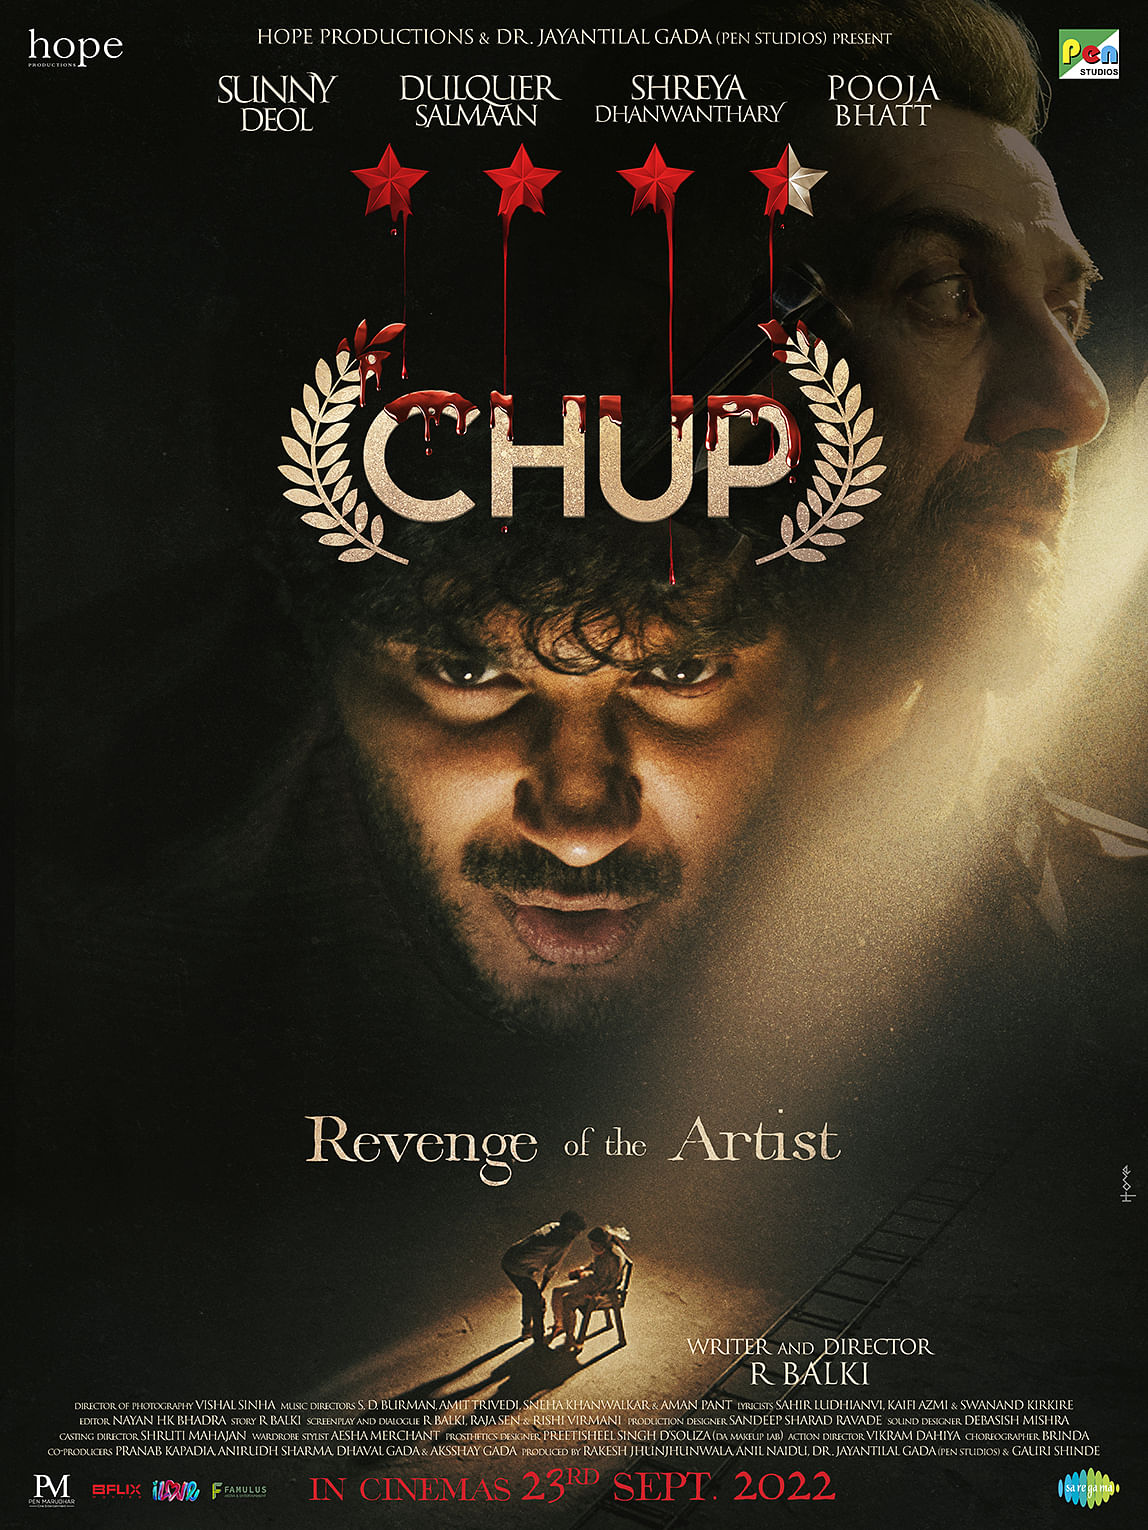 In this episode, our host Prateek Lidhoo talks about Chup and how its director R Balki views film criticism. 